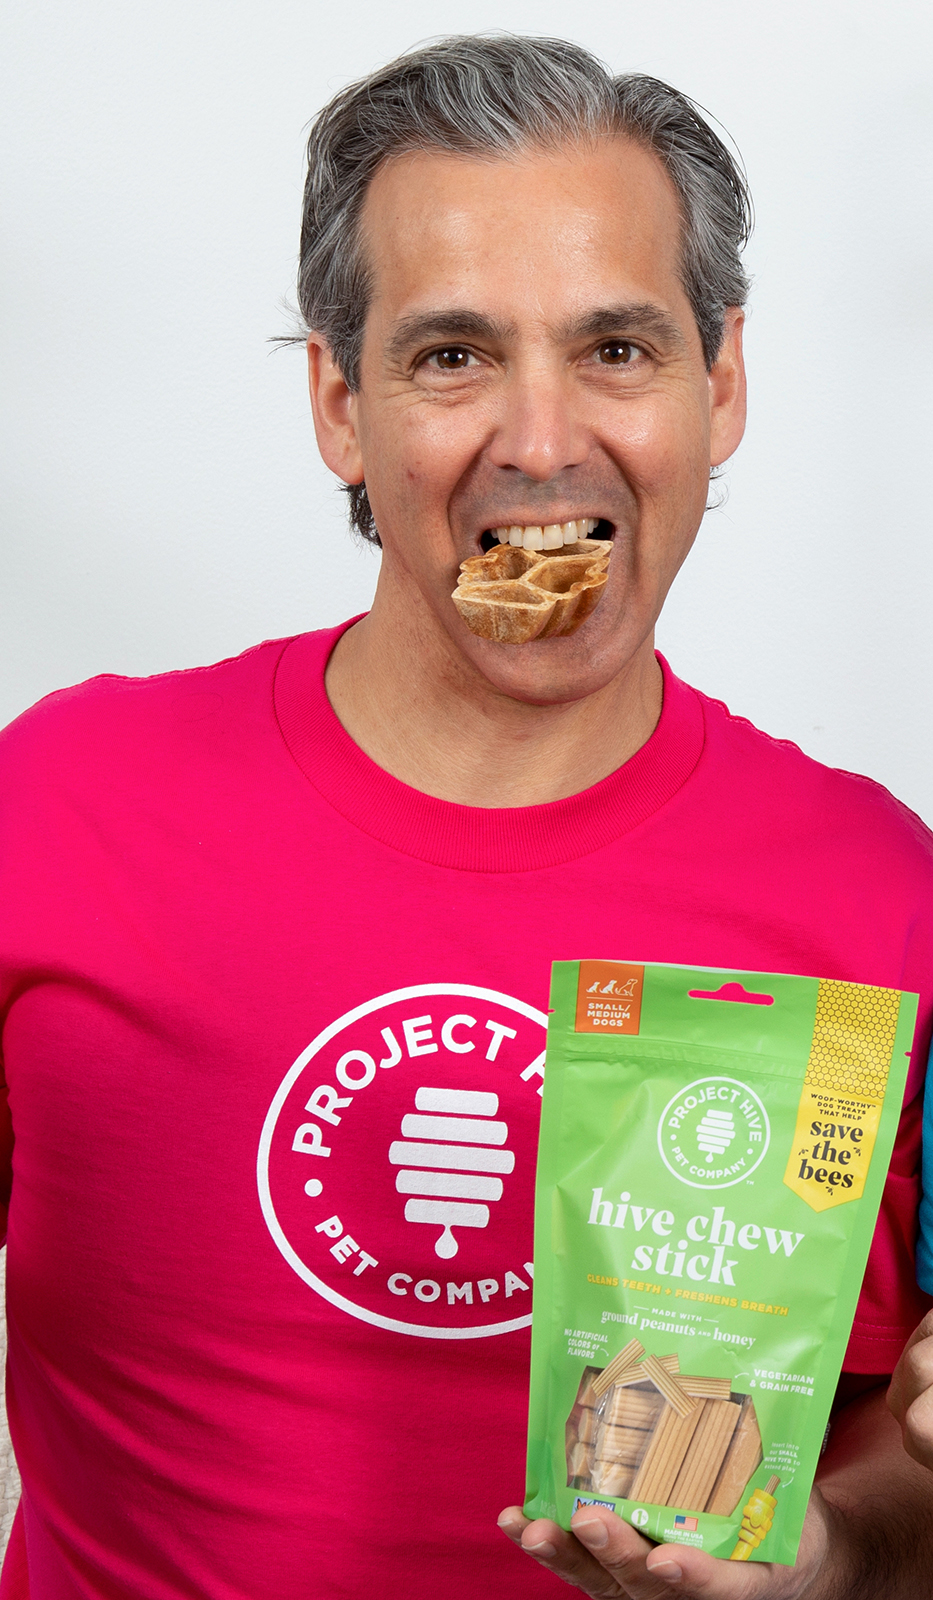 Jim Schifman, with a honeycombed-shaped dog treat in his mouth